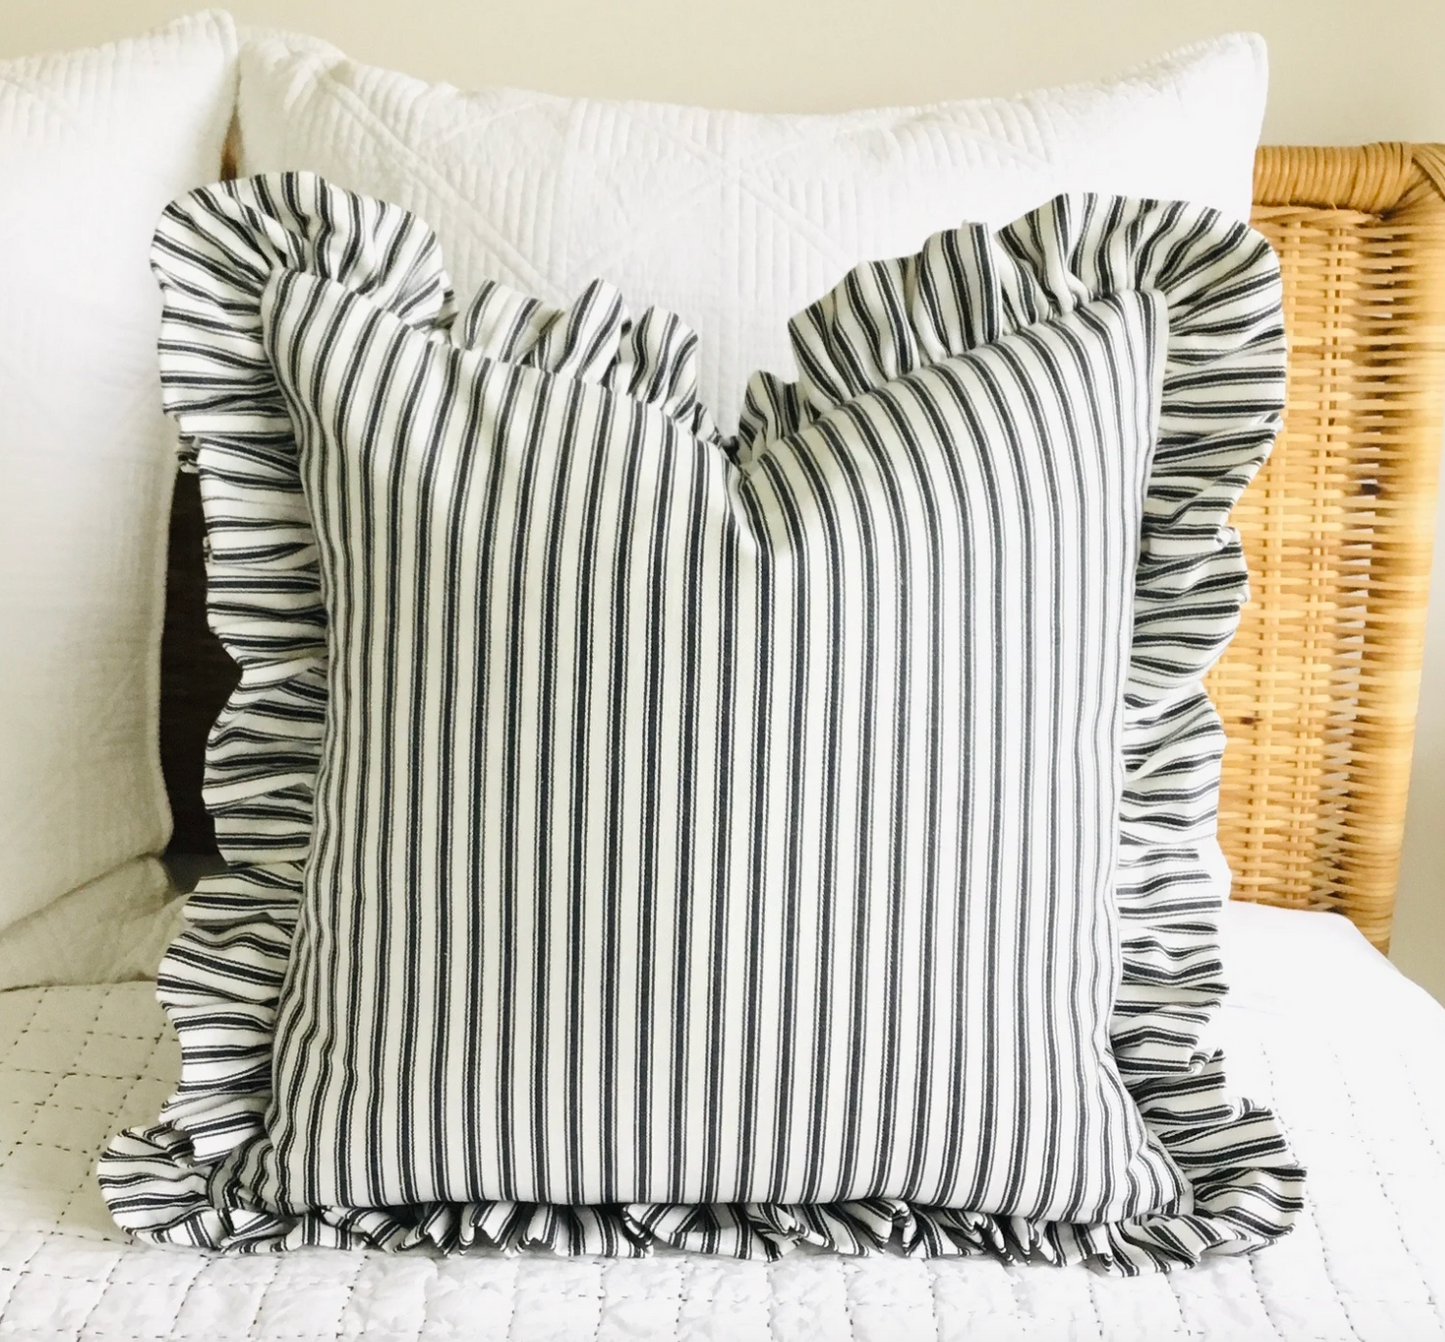 Intro to Sewing for Interiors - Drapes & Pillows